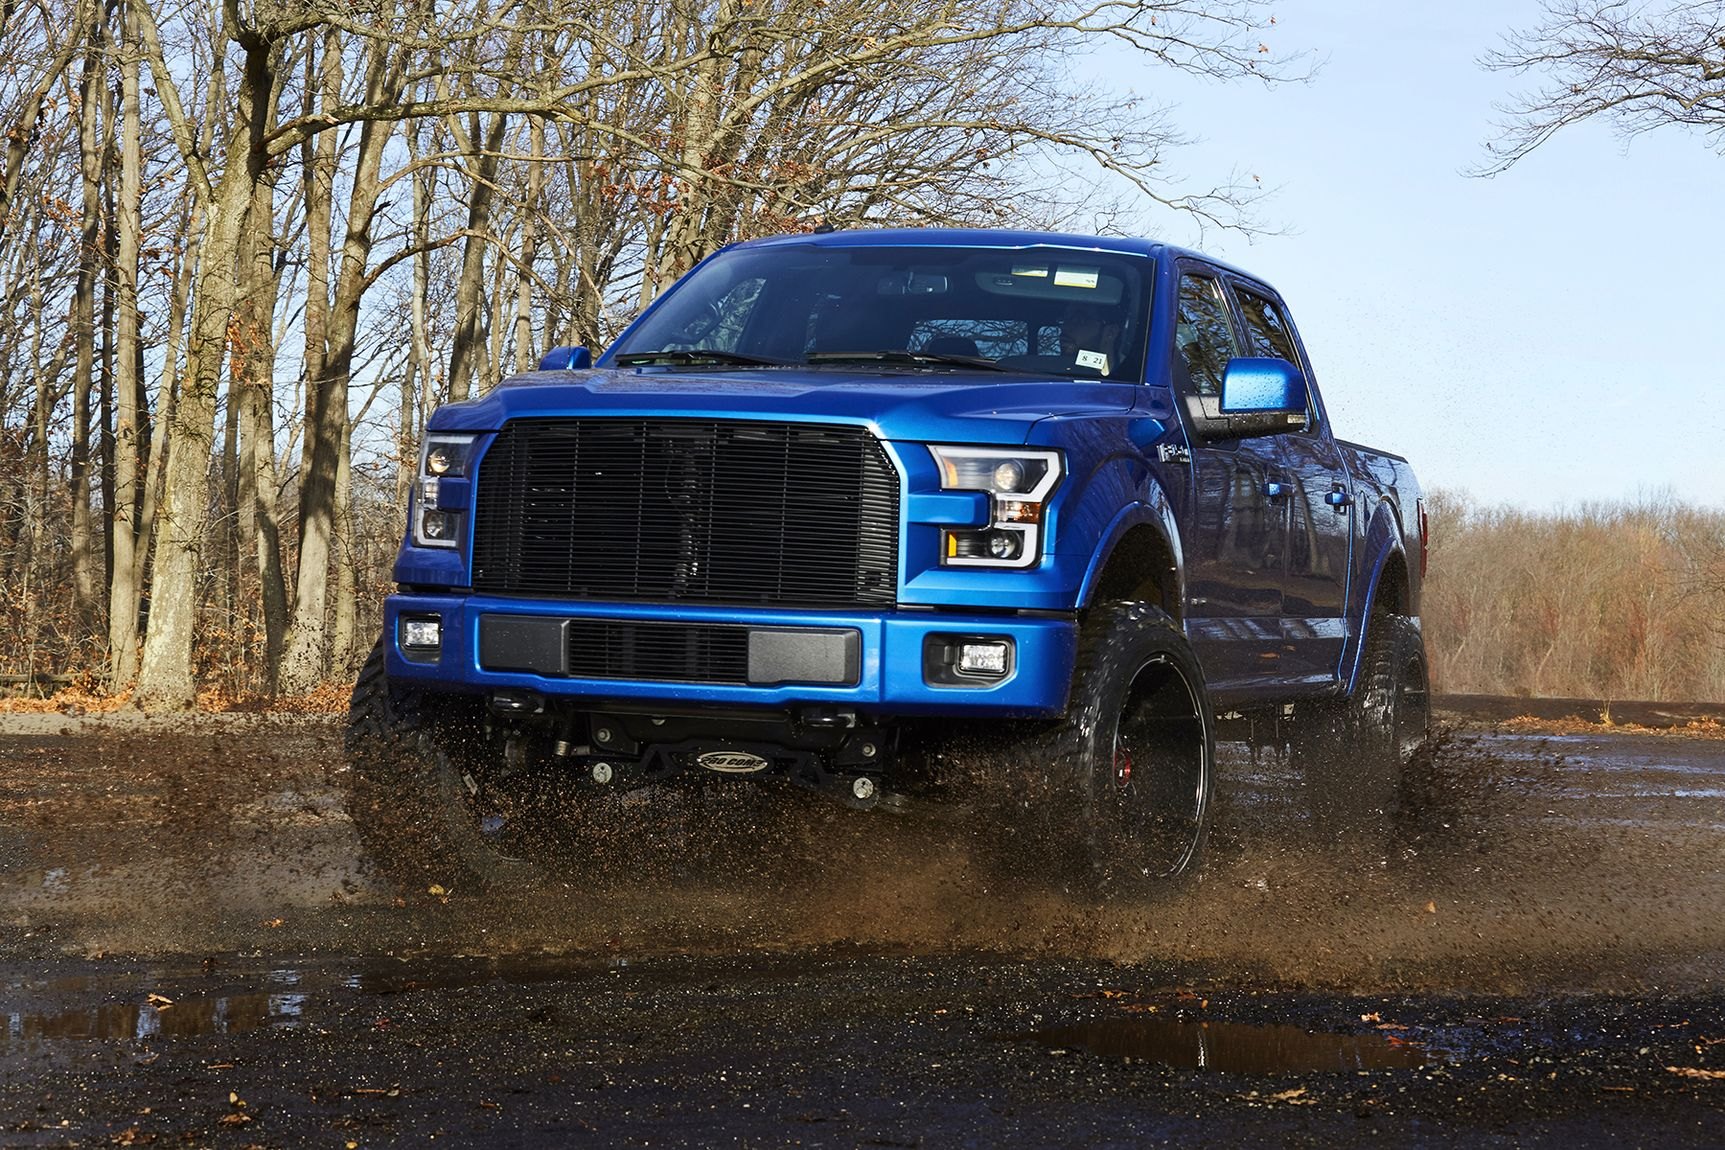 Blacked Out Billet Grille on Blue Lifted Ford F-150 - Photo by CARiD